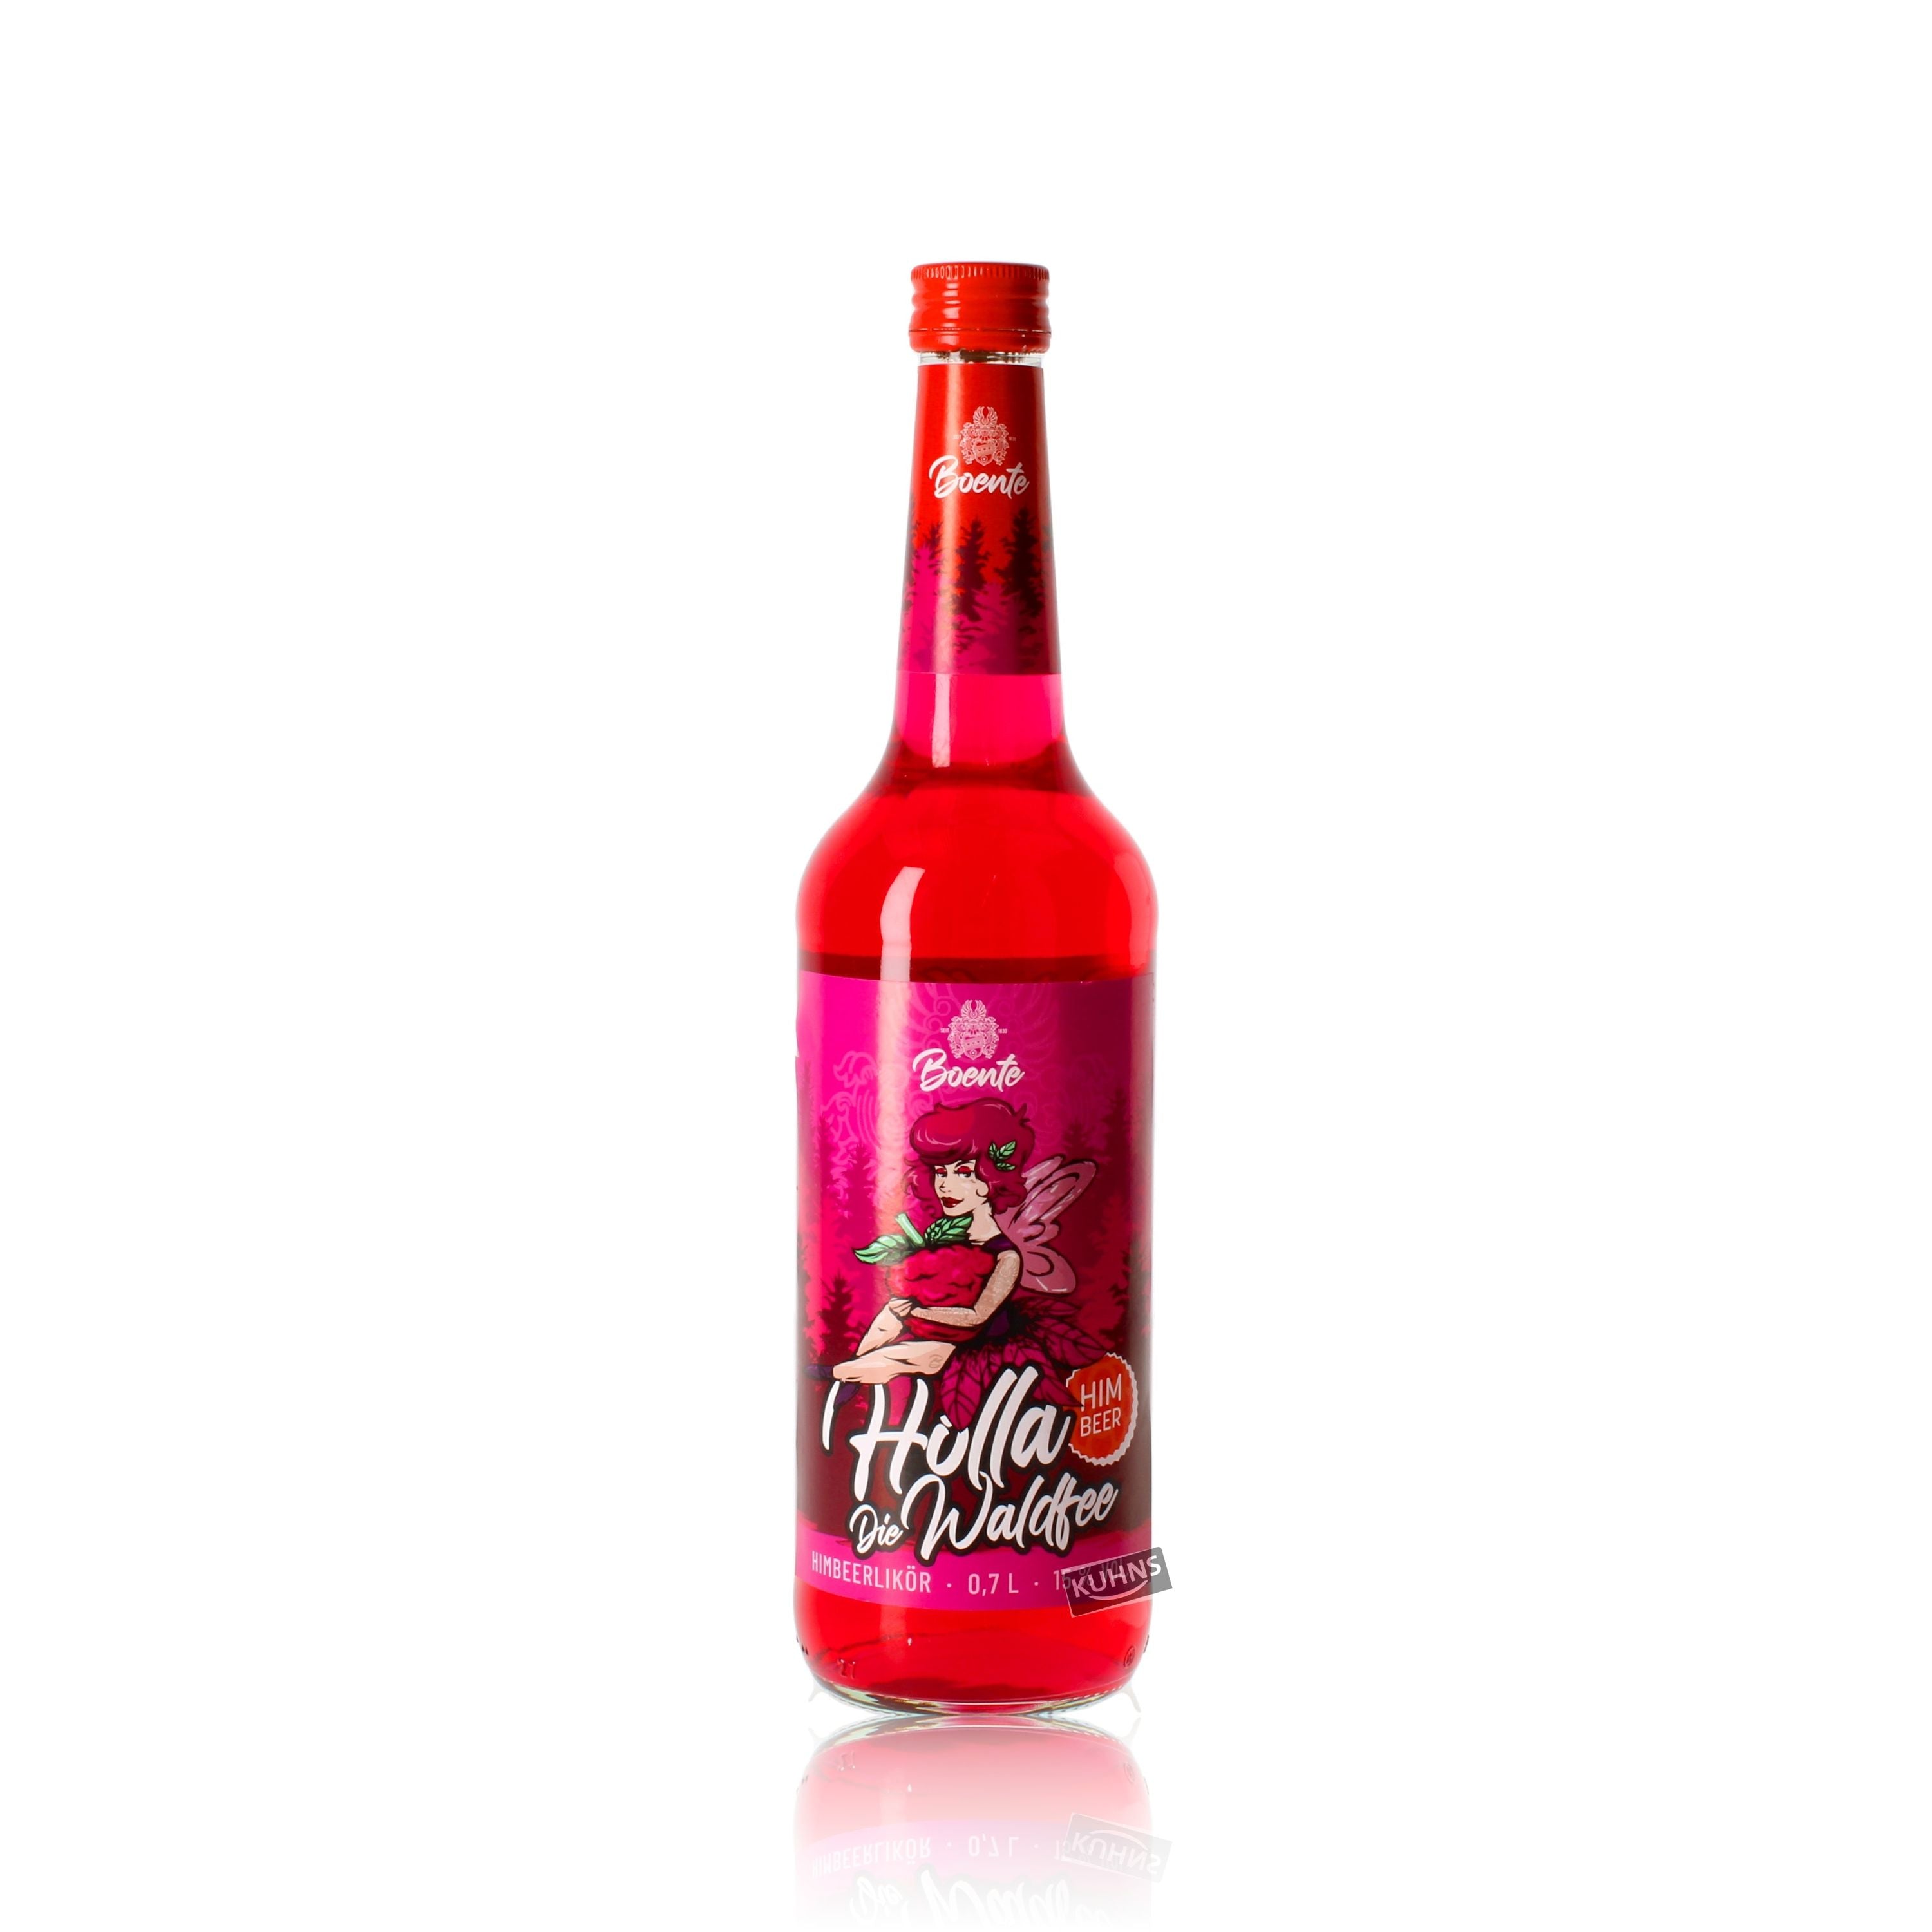 Holla the forest fairy 0.7l, alc. 15% by volume, raspberry liqueur Germany